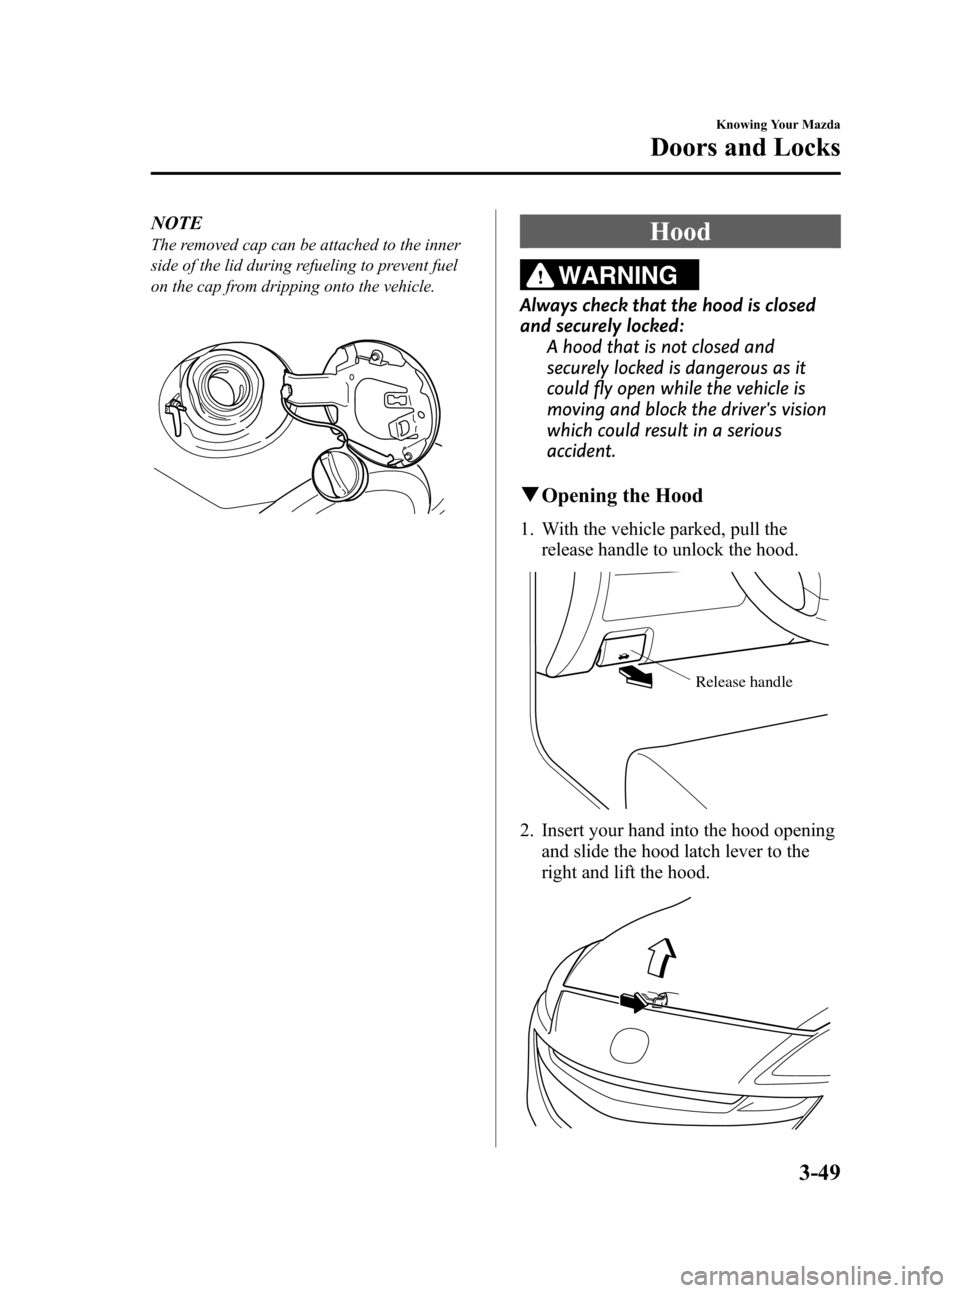 MAZDA MODEL 3 HATCHBACK 2011  Owners Manual (in English) Black plate (125,1)
NOTE
The removed cap can be attached to the inner
side of the lid during refueling to prevent fuel
on the cap from dripping onto the vehicle.Hood
WARNING
Always check that the hood